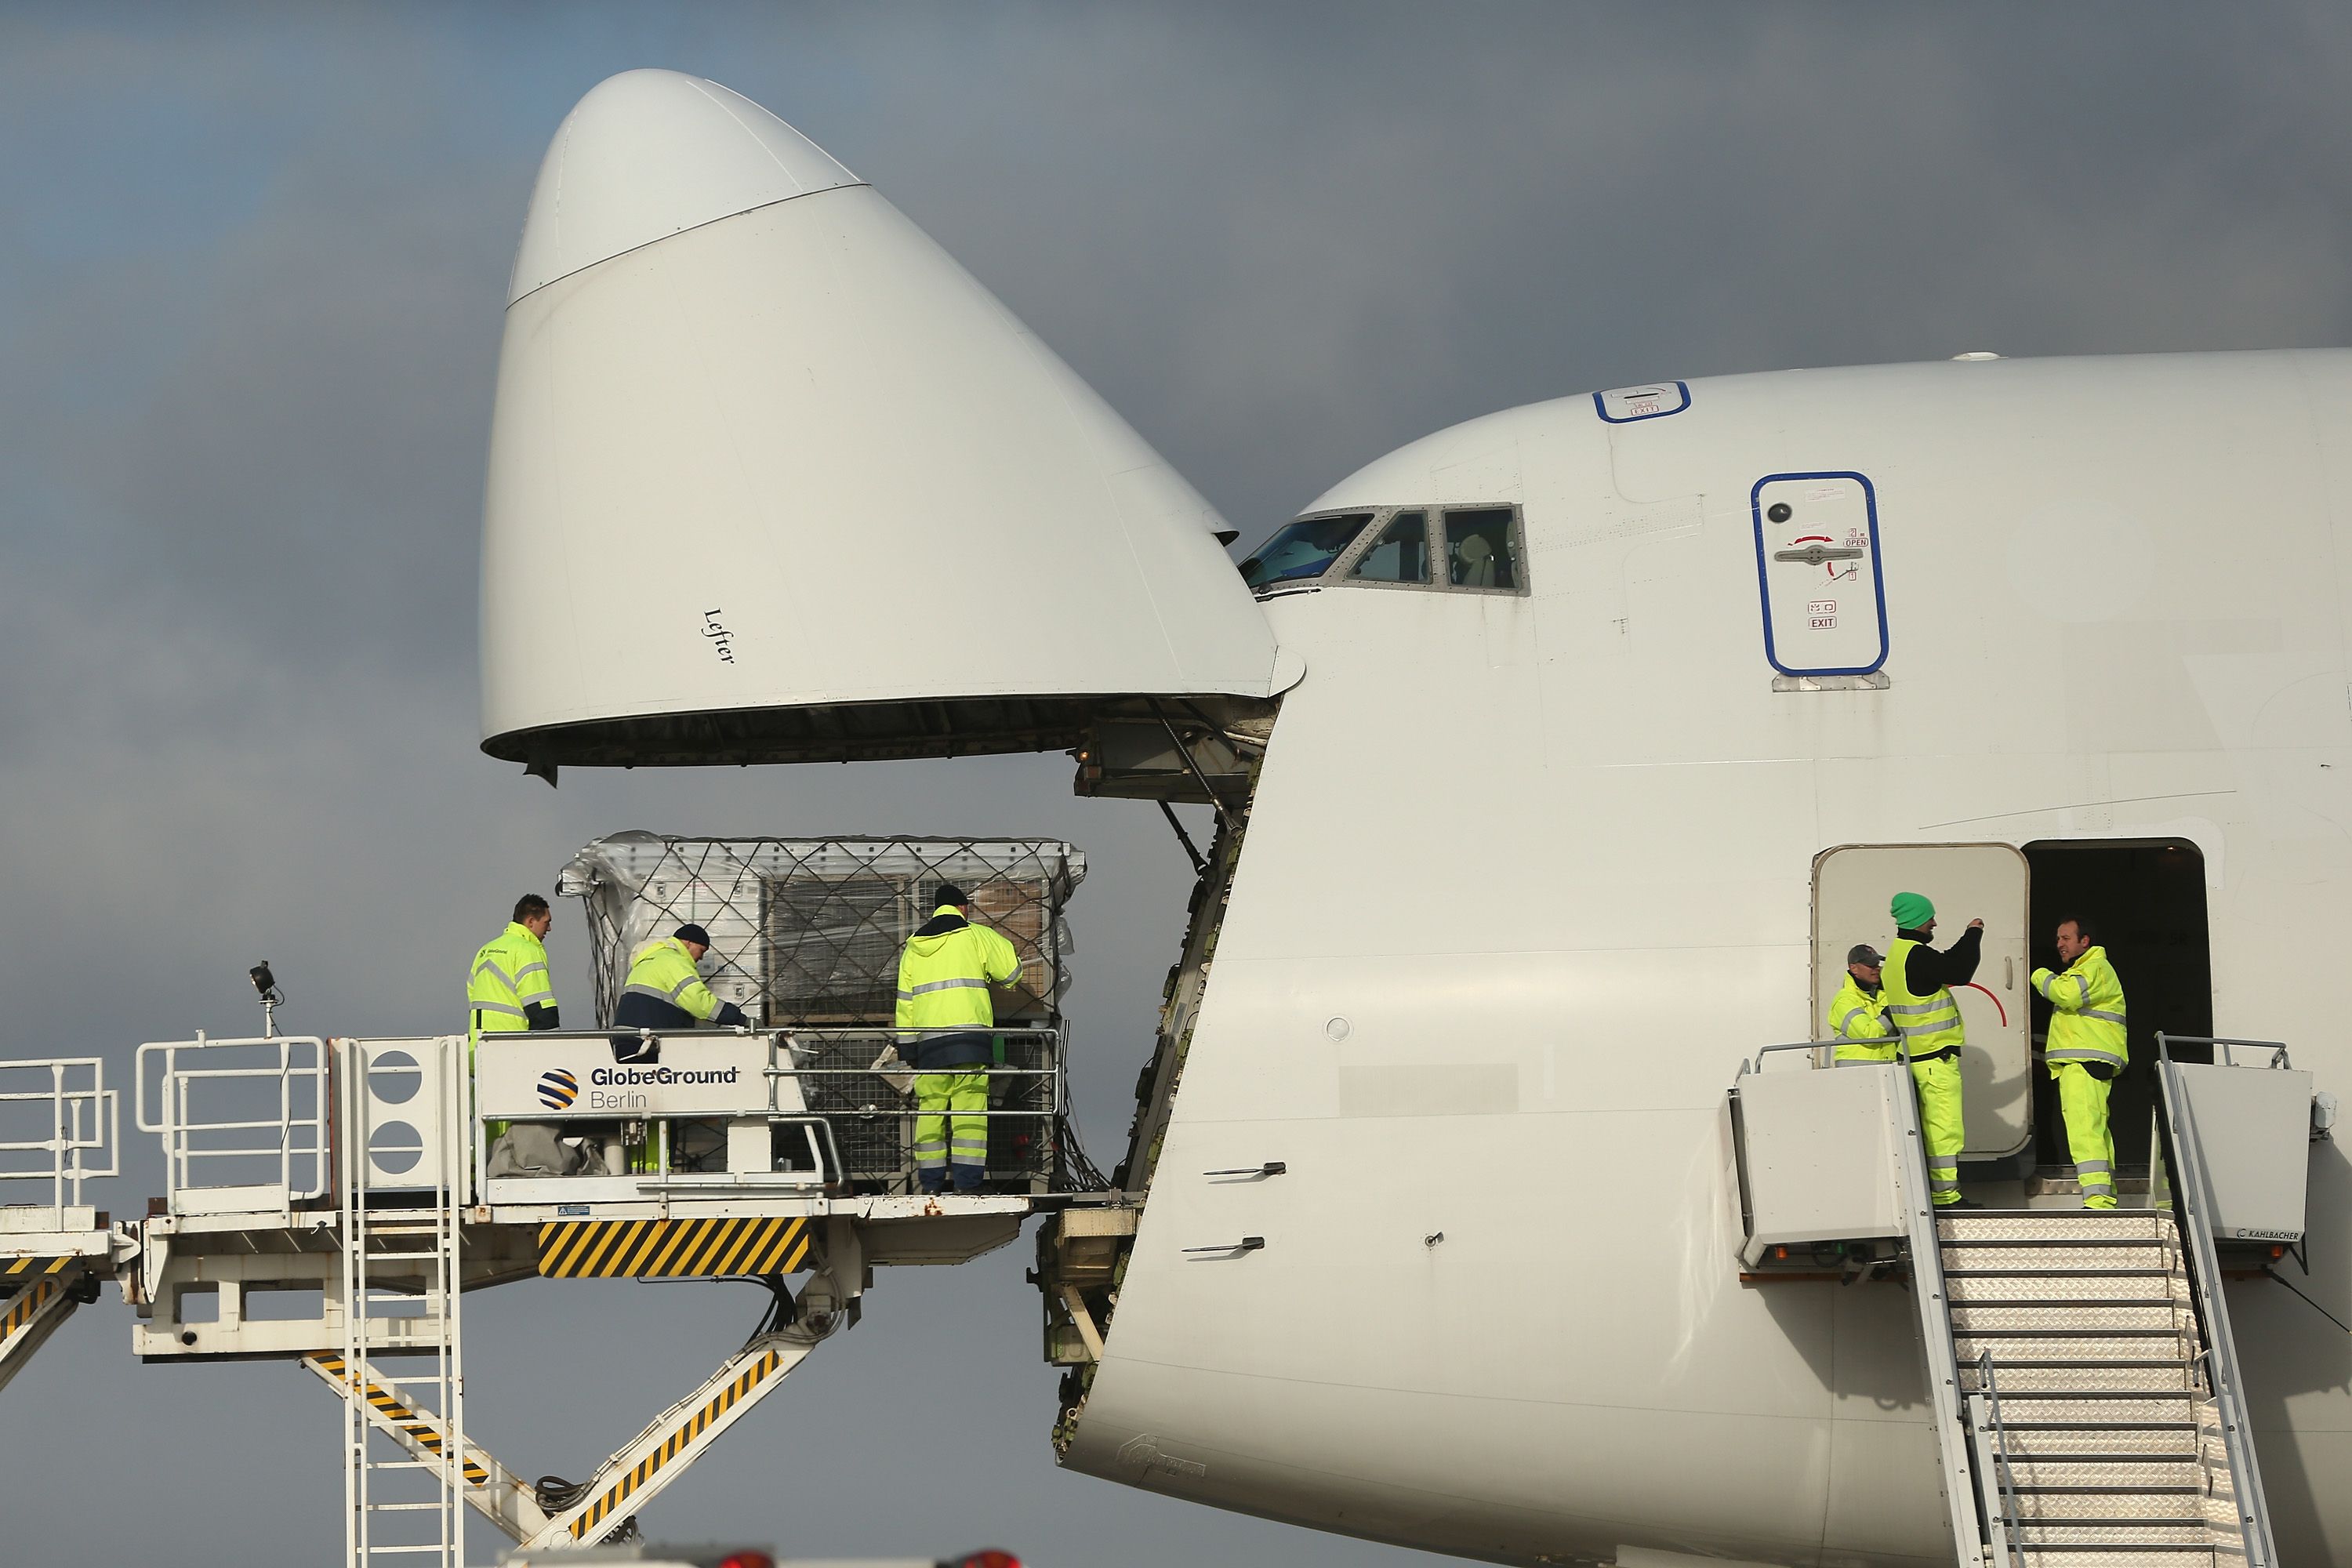 Boeing 747 cargo plane being loaded